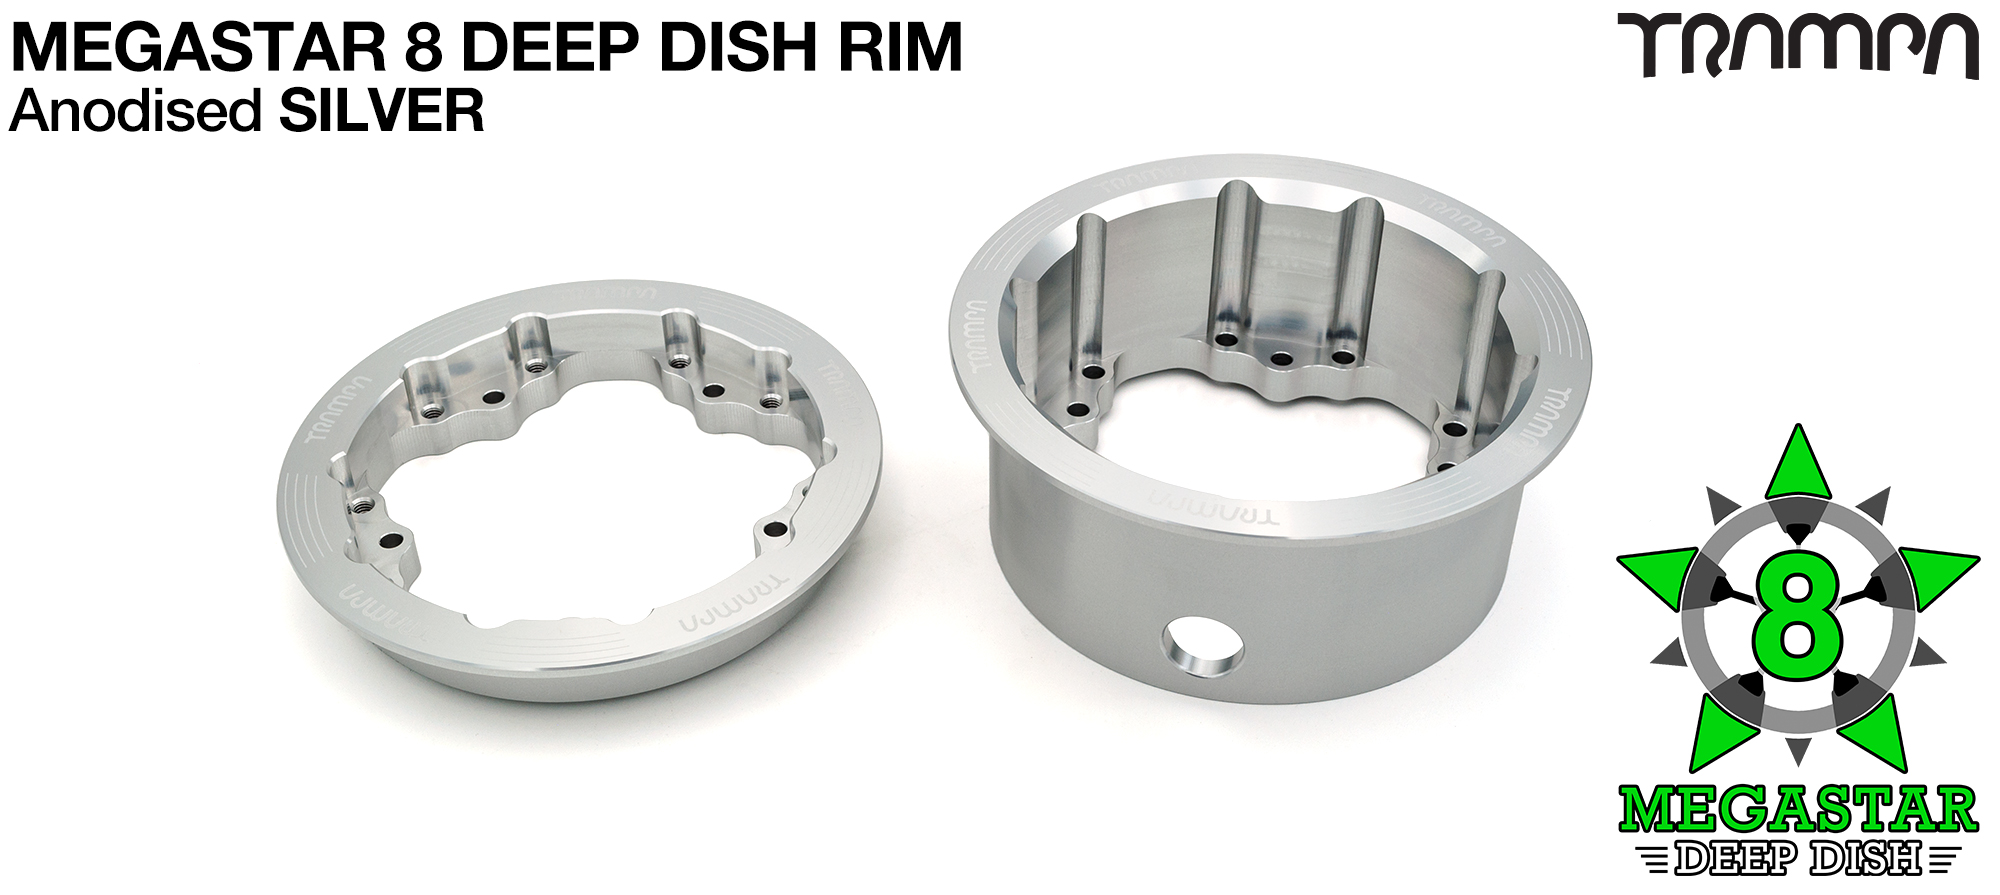 MEGASTAR 8 DEEP-DISH Rims Measure 3.75 x 2.5 Inch. The bearings are positioned OFF-SET widening the wheel base & accept all 3.75 Rim Tyres - SILVER